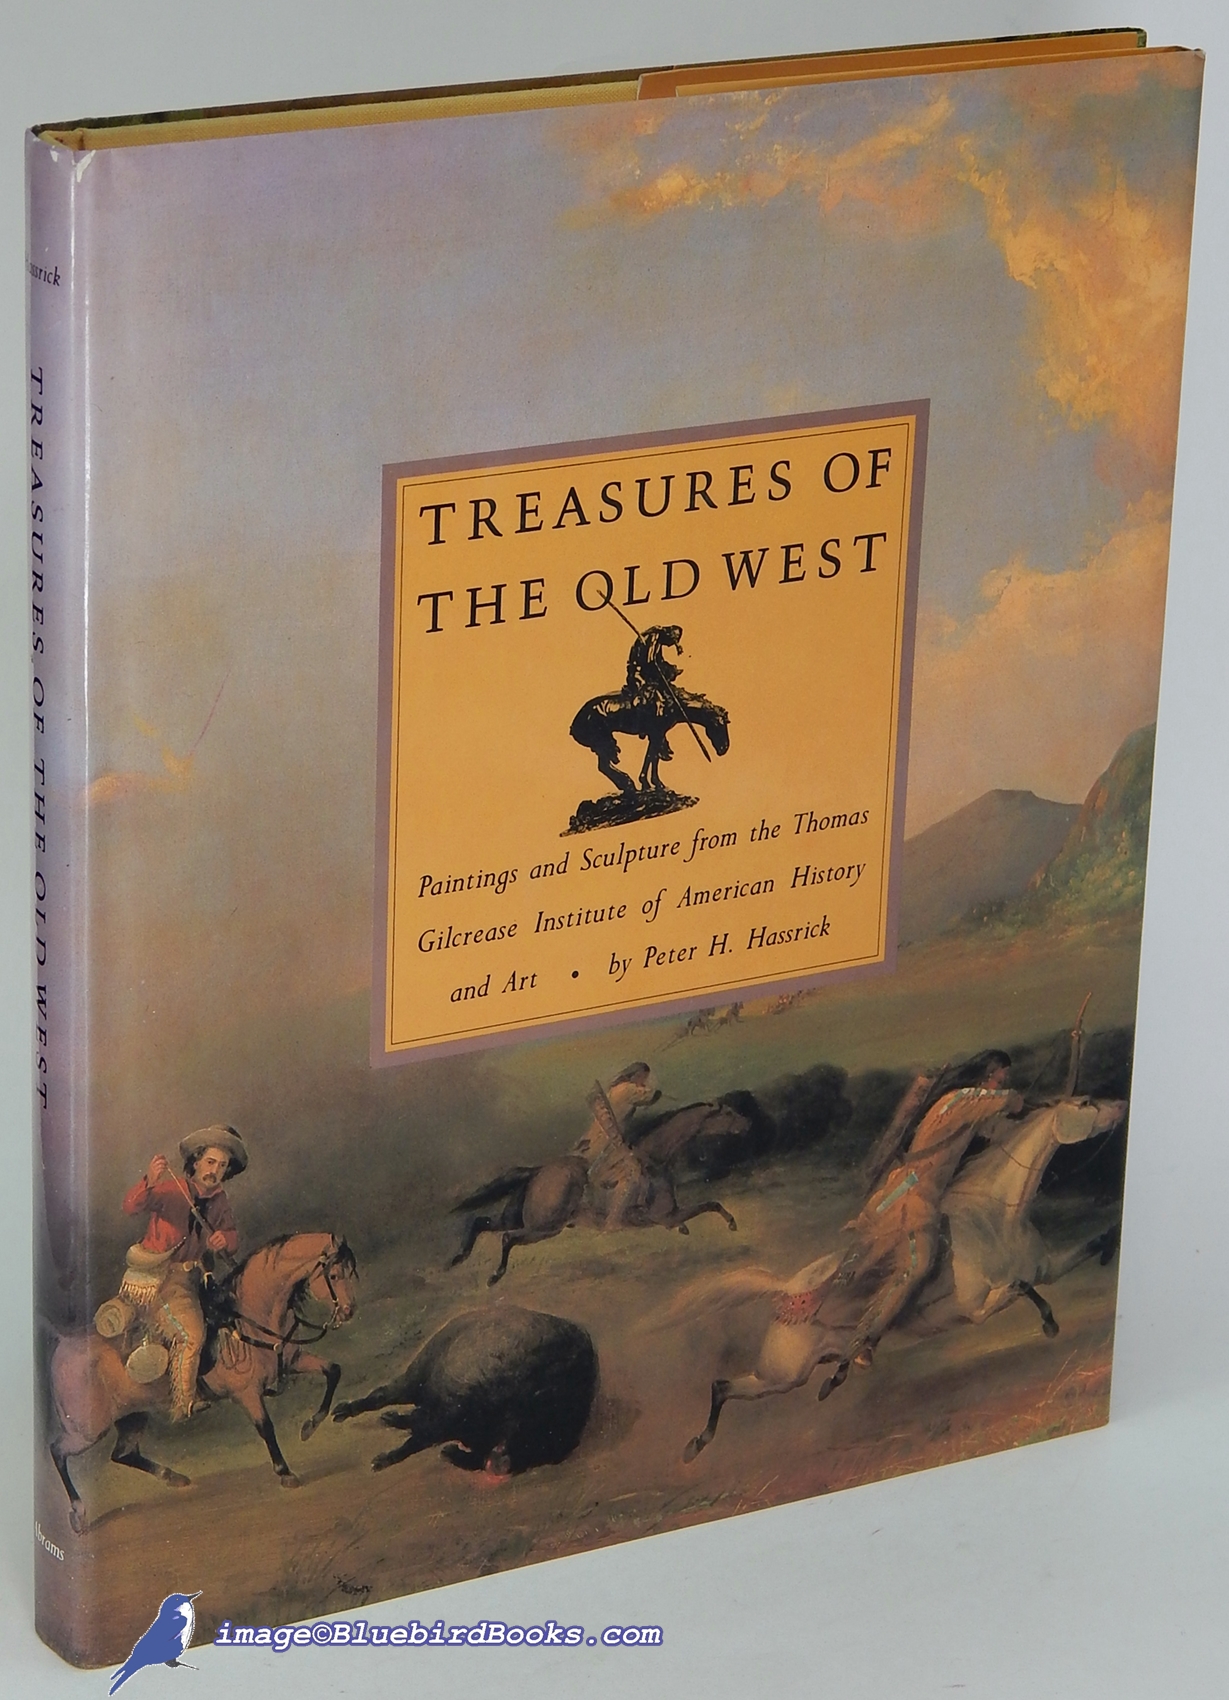 Image for Treasures of the Old West: Paintings and Sculpture from the Thomas Gilcrease Institute of American History and Art